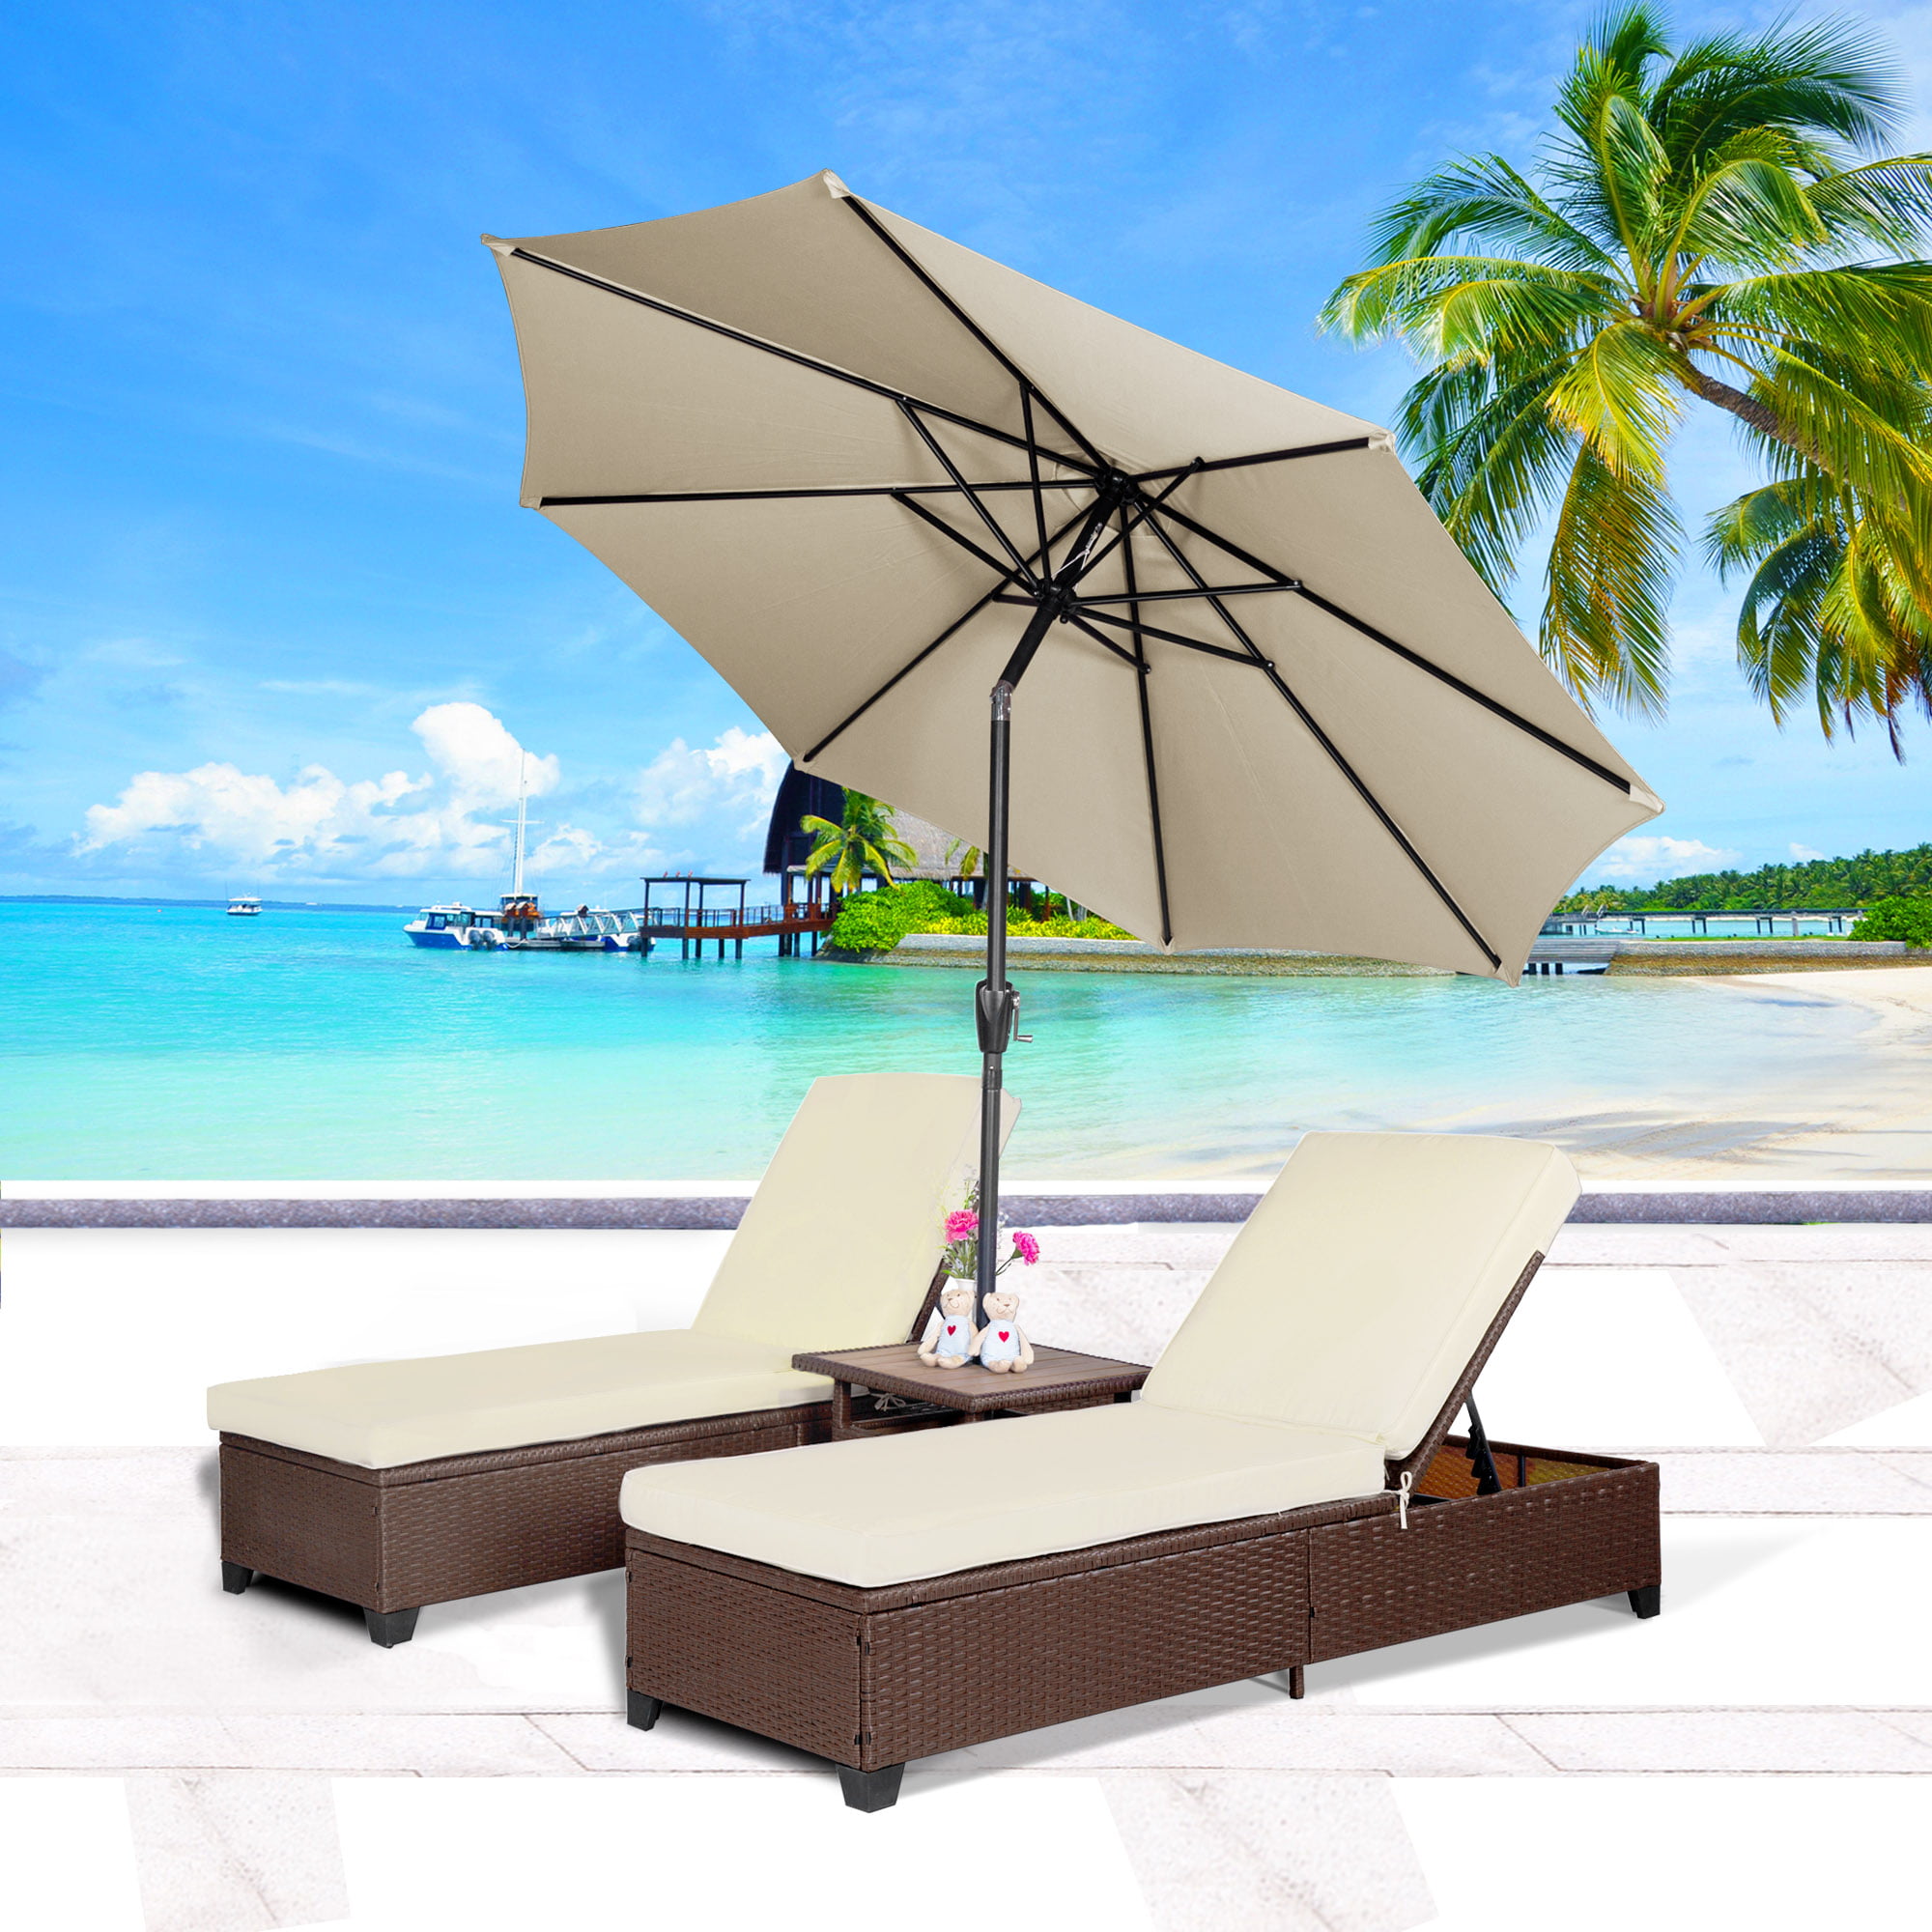 pool chair with umbrella